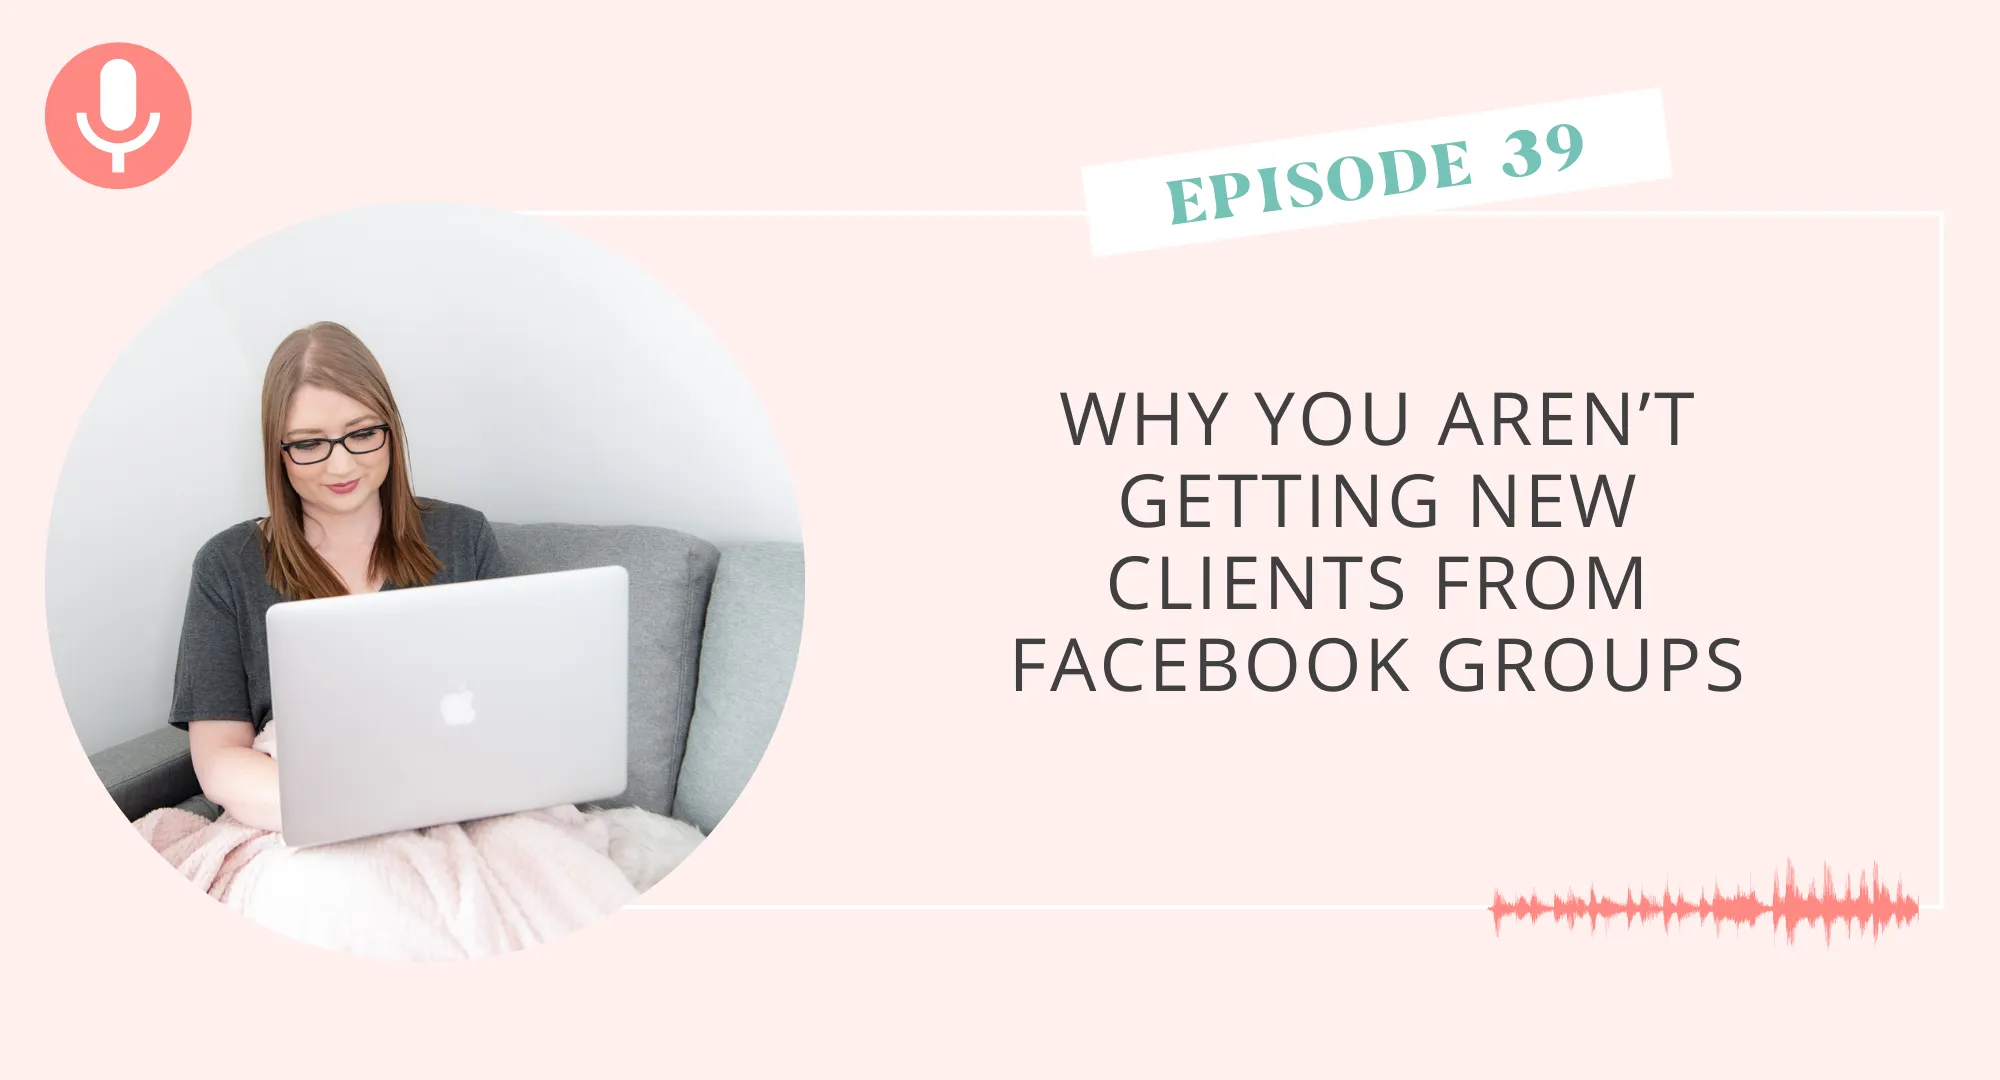 Why You Aren’t Getting New Clients From Facebook Groups